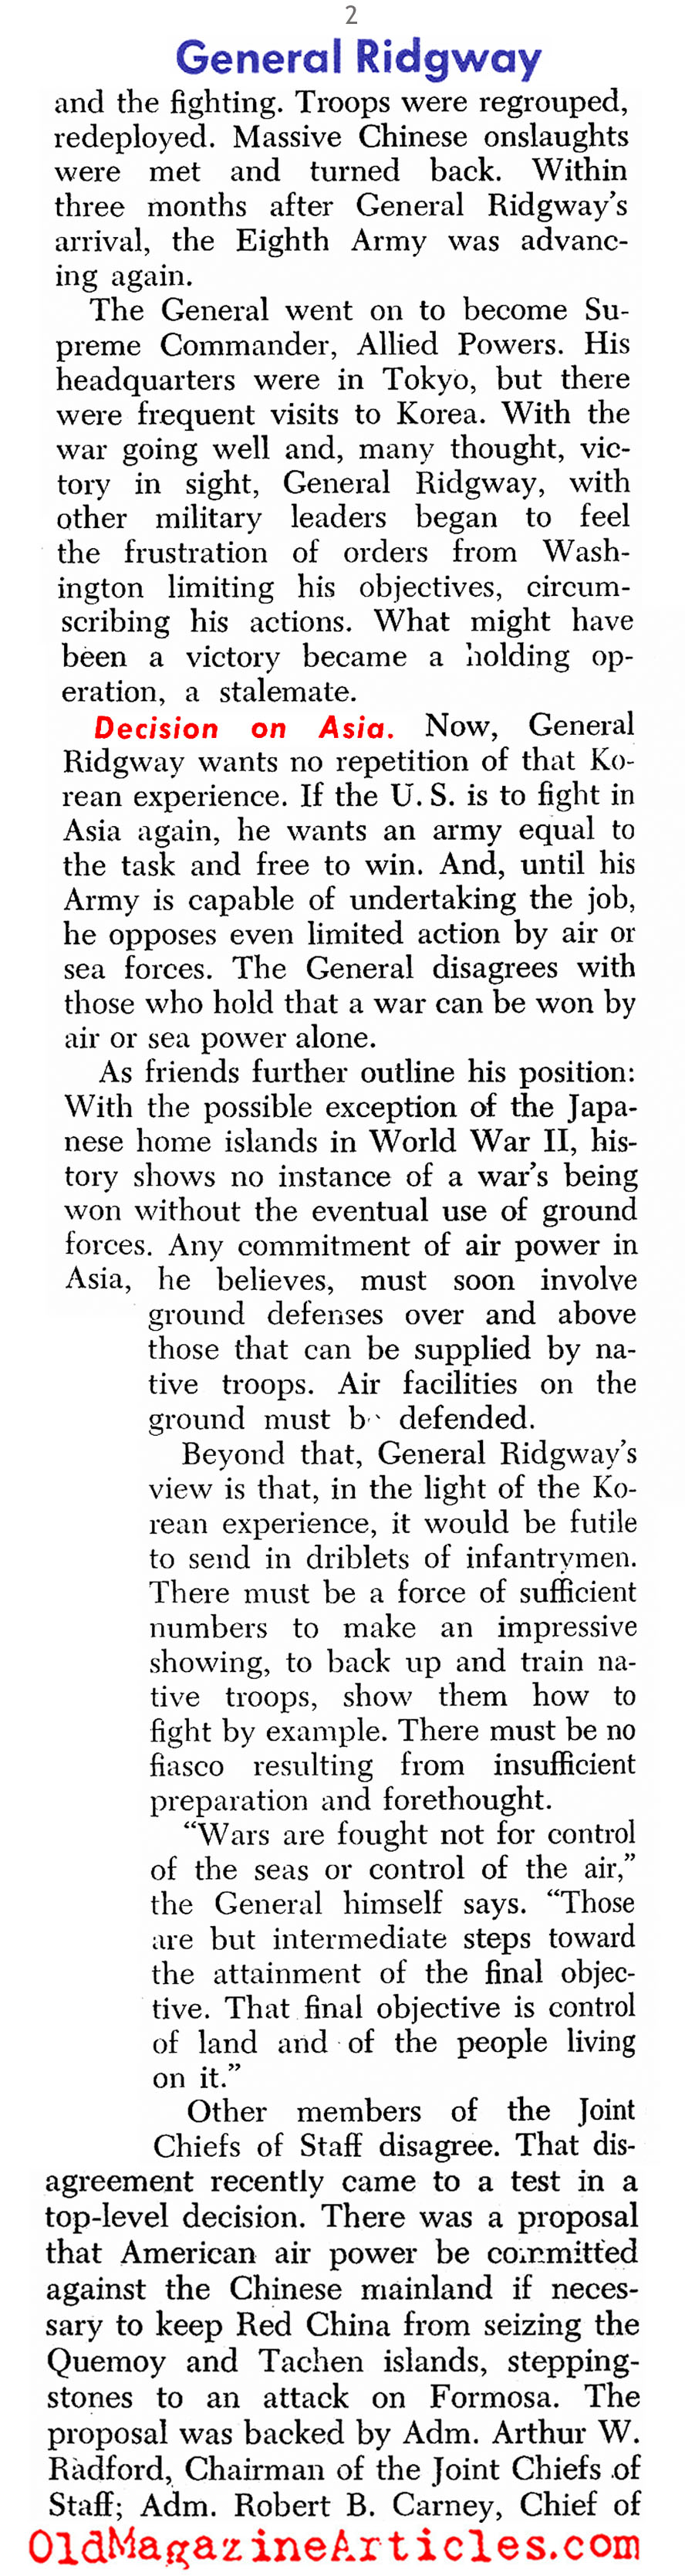 ''No More Wars In Asia'' (United States News, 1954)